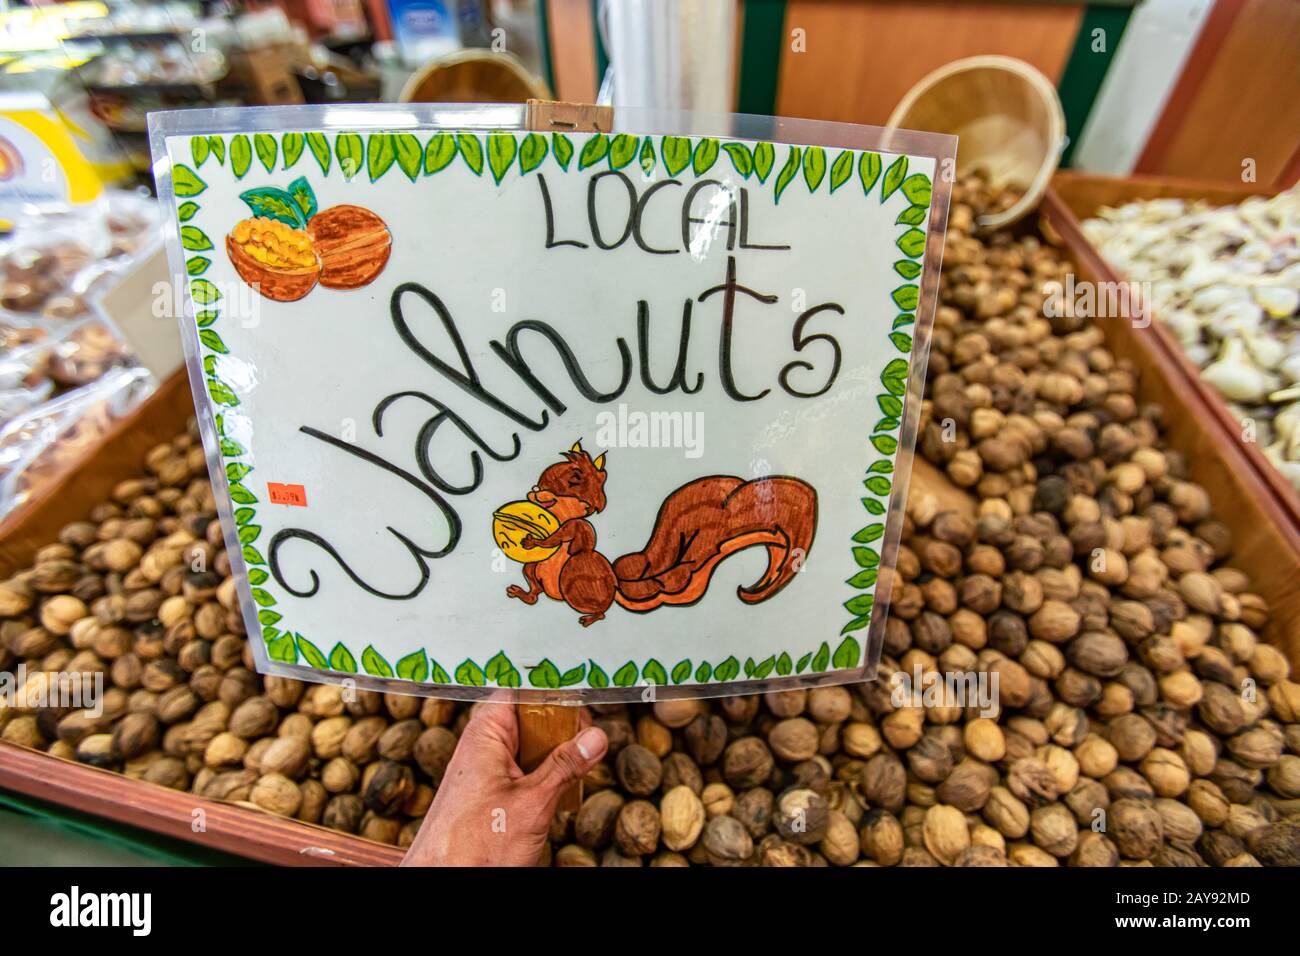 Dried walnuts on sale at the local food market. Hand written plasticized signboard. Drawing of happy and smiling squirrel holding a walnut. Stock Photo